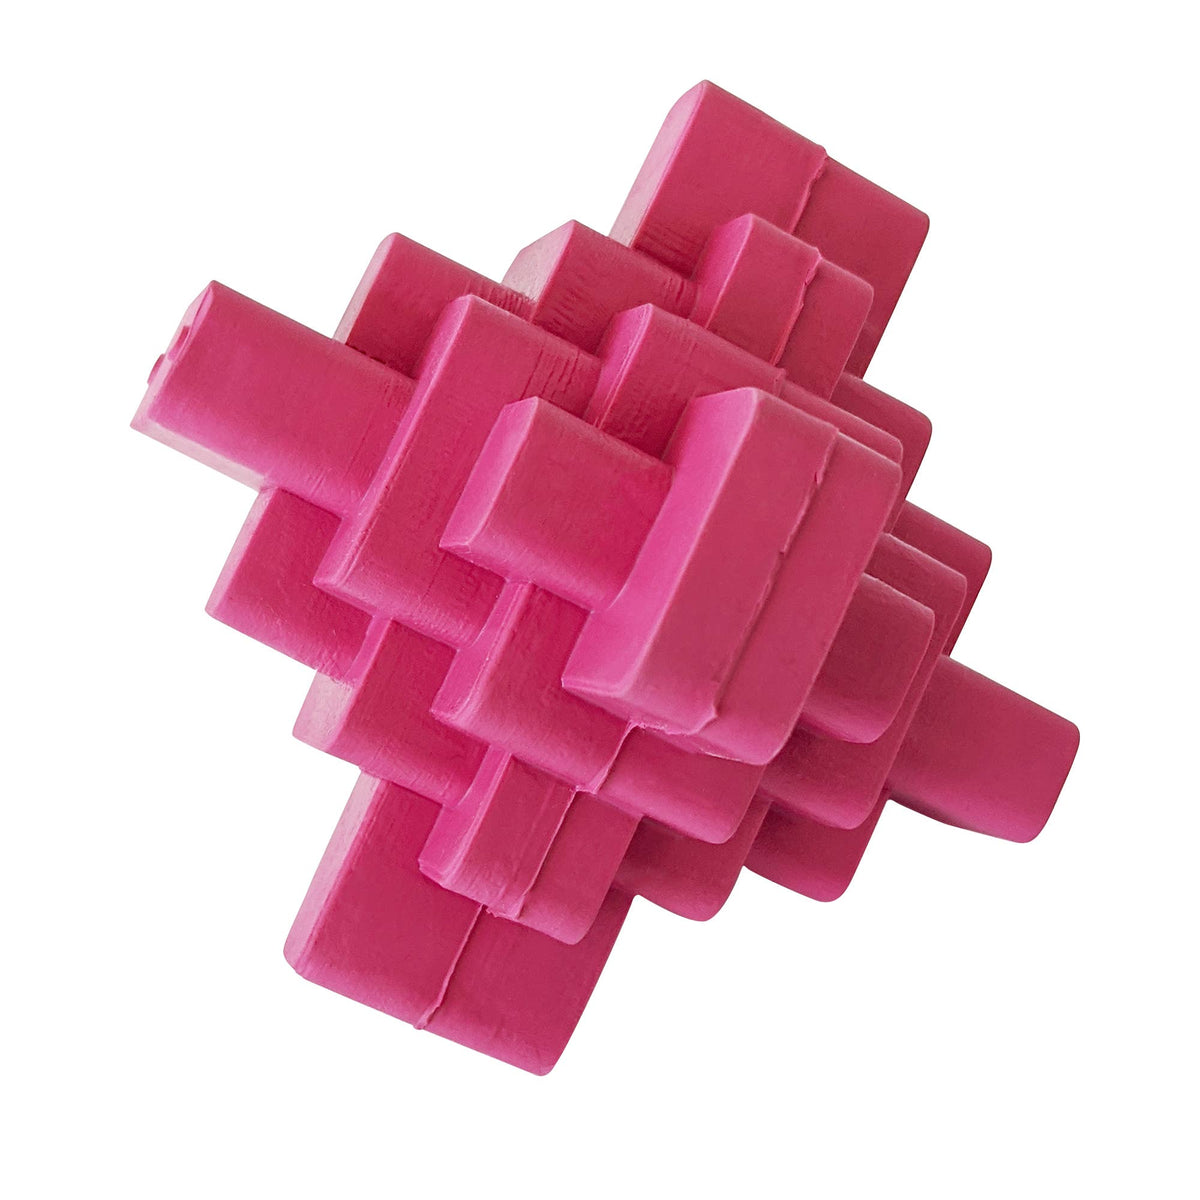 Geometric TPR Dog Chew Toy - Pink by American Pet Supplies